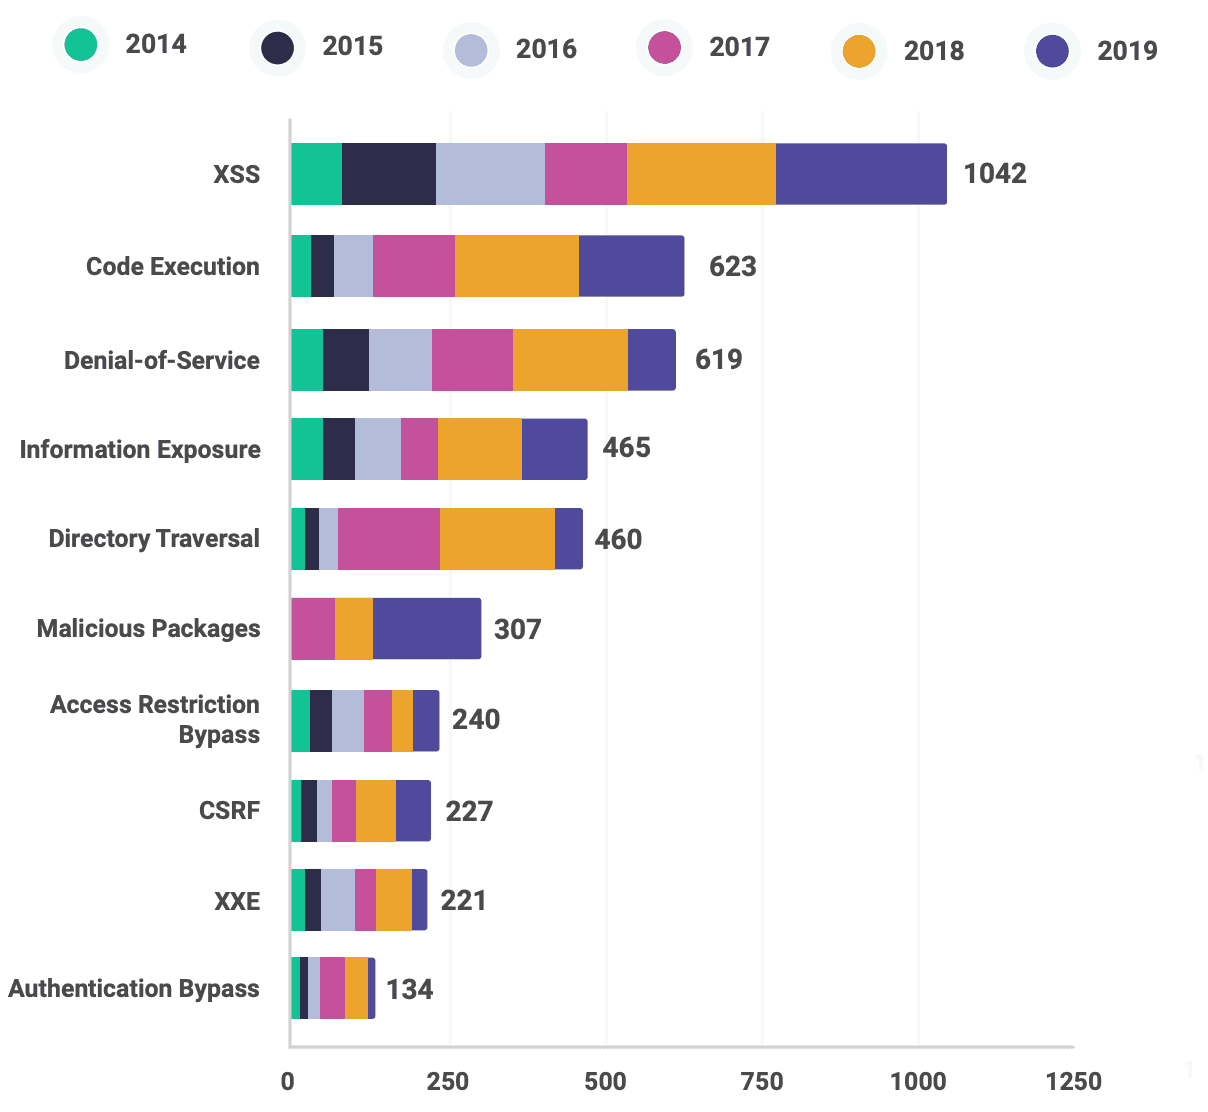 XSS was the most common vulnerability in 2019